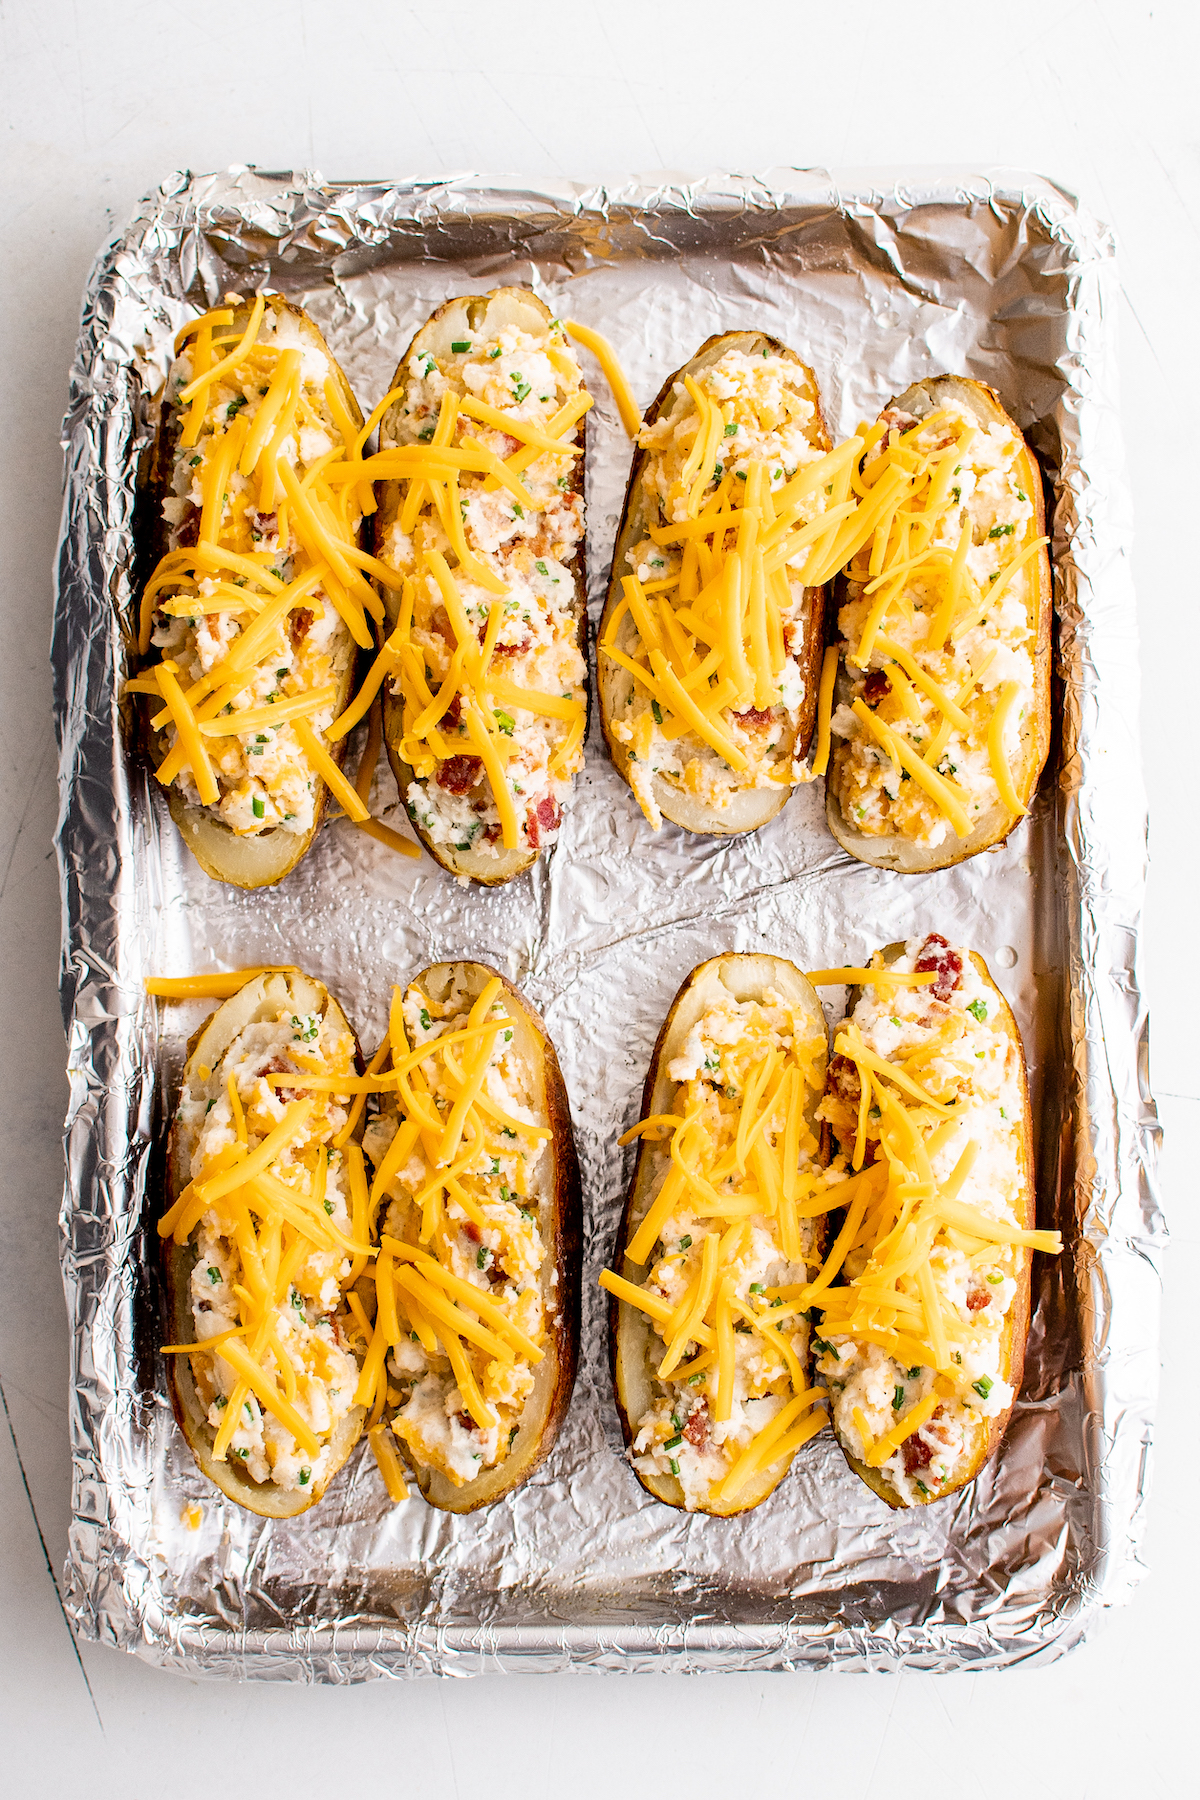 Unbaked stuffed potatoes topped with shredded cheese.